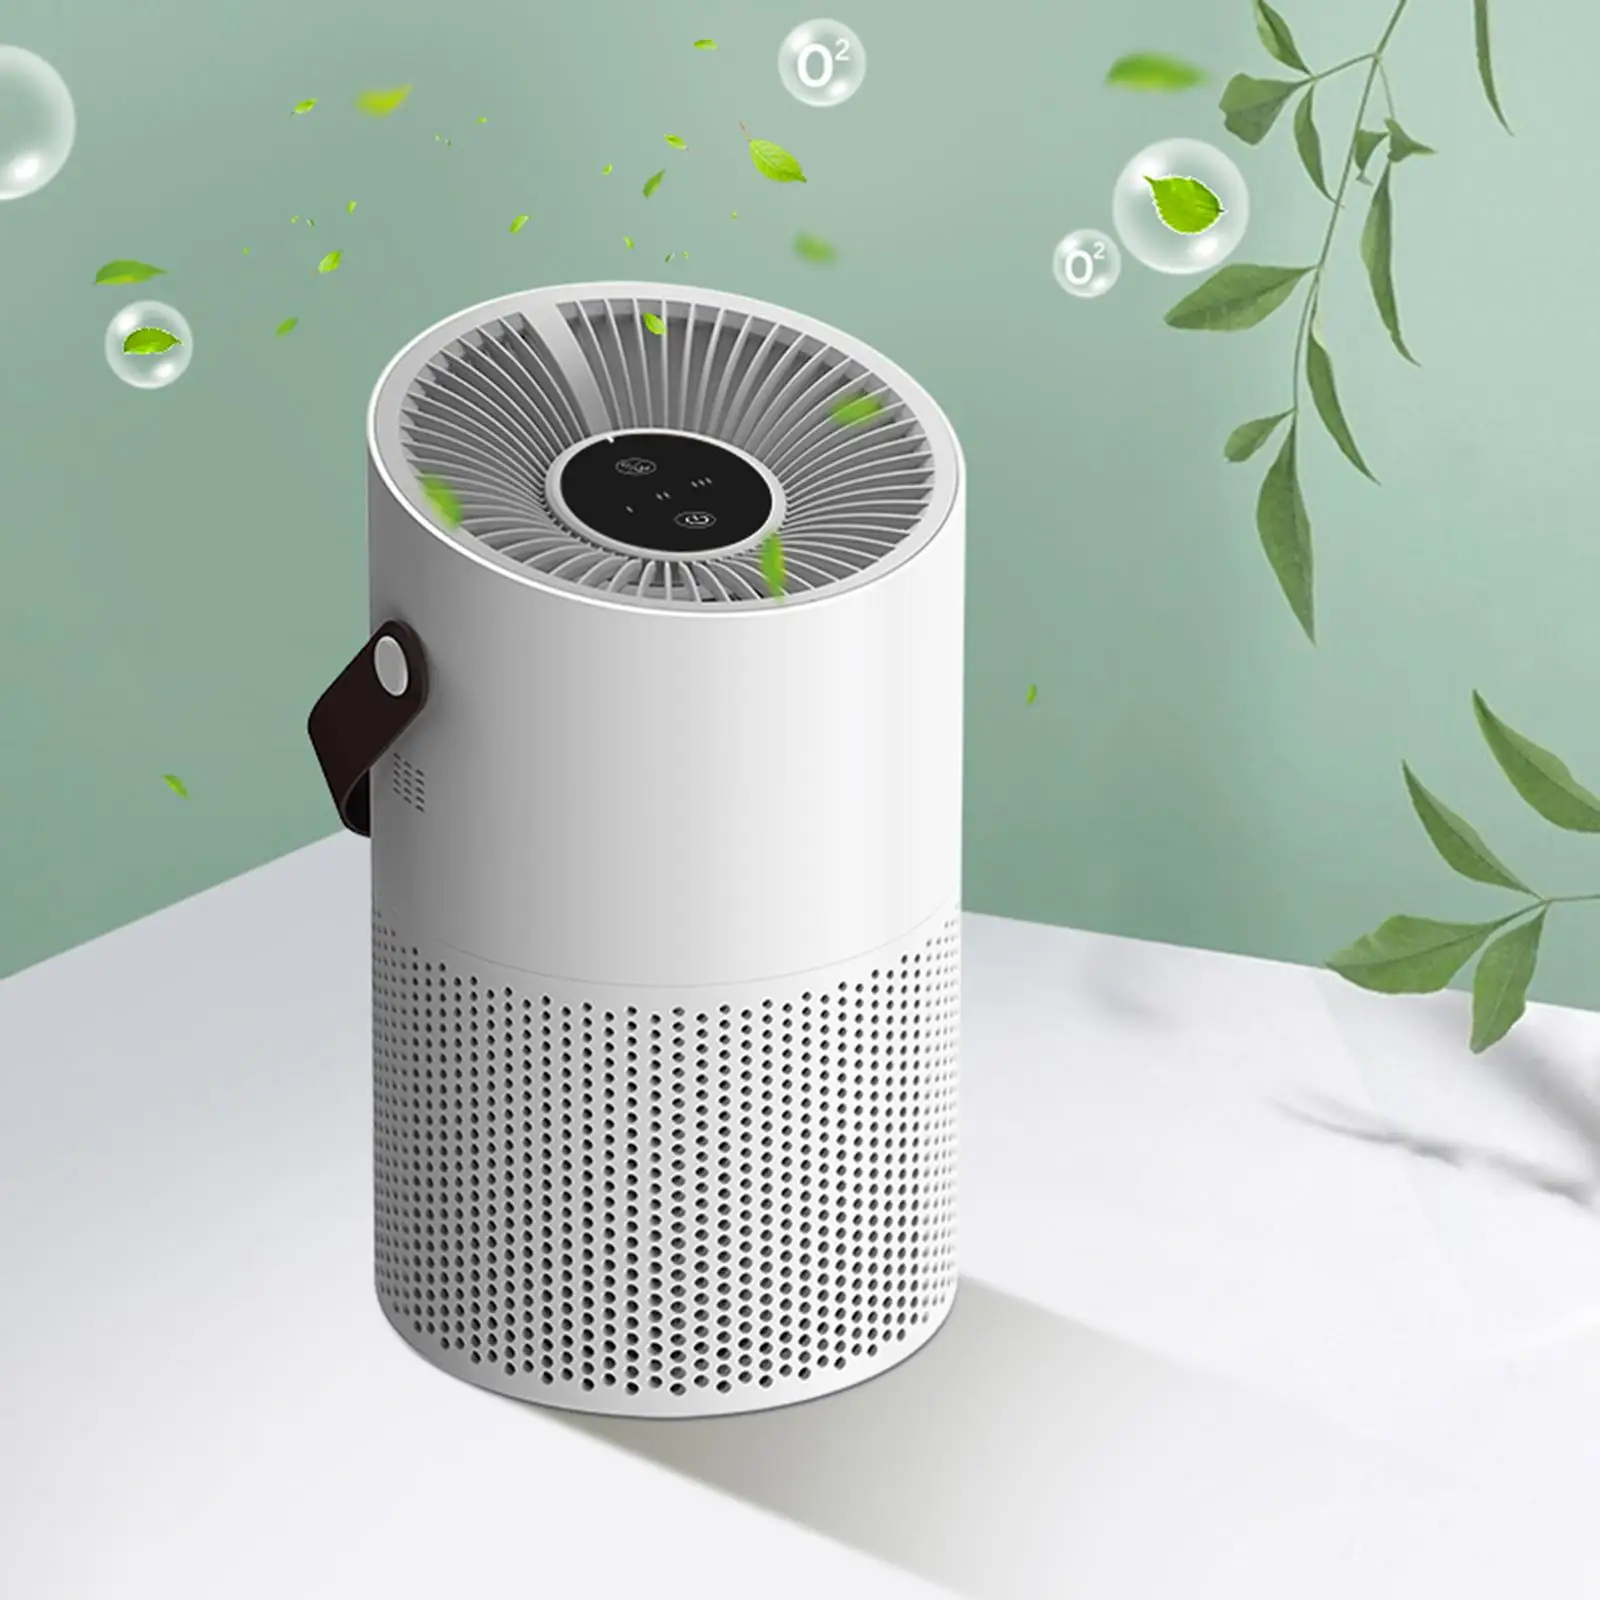 Portable Air Cleaner 4 Layer Filter Powereful 3 Gears Wind Speed Desktop Air Purifiers for Bedroom Hotels Office Smoke Pollen